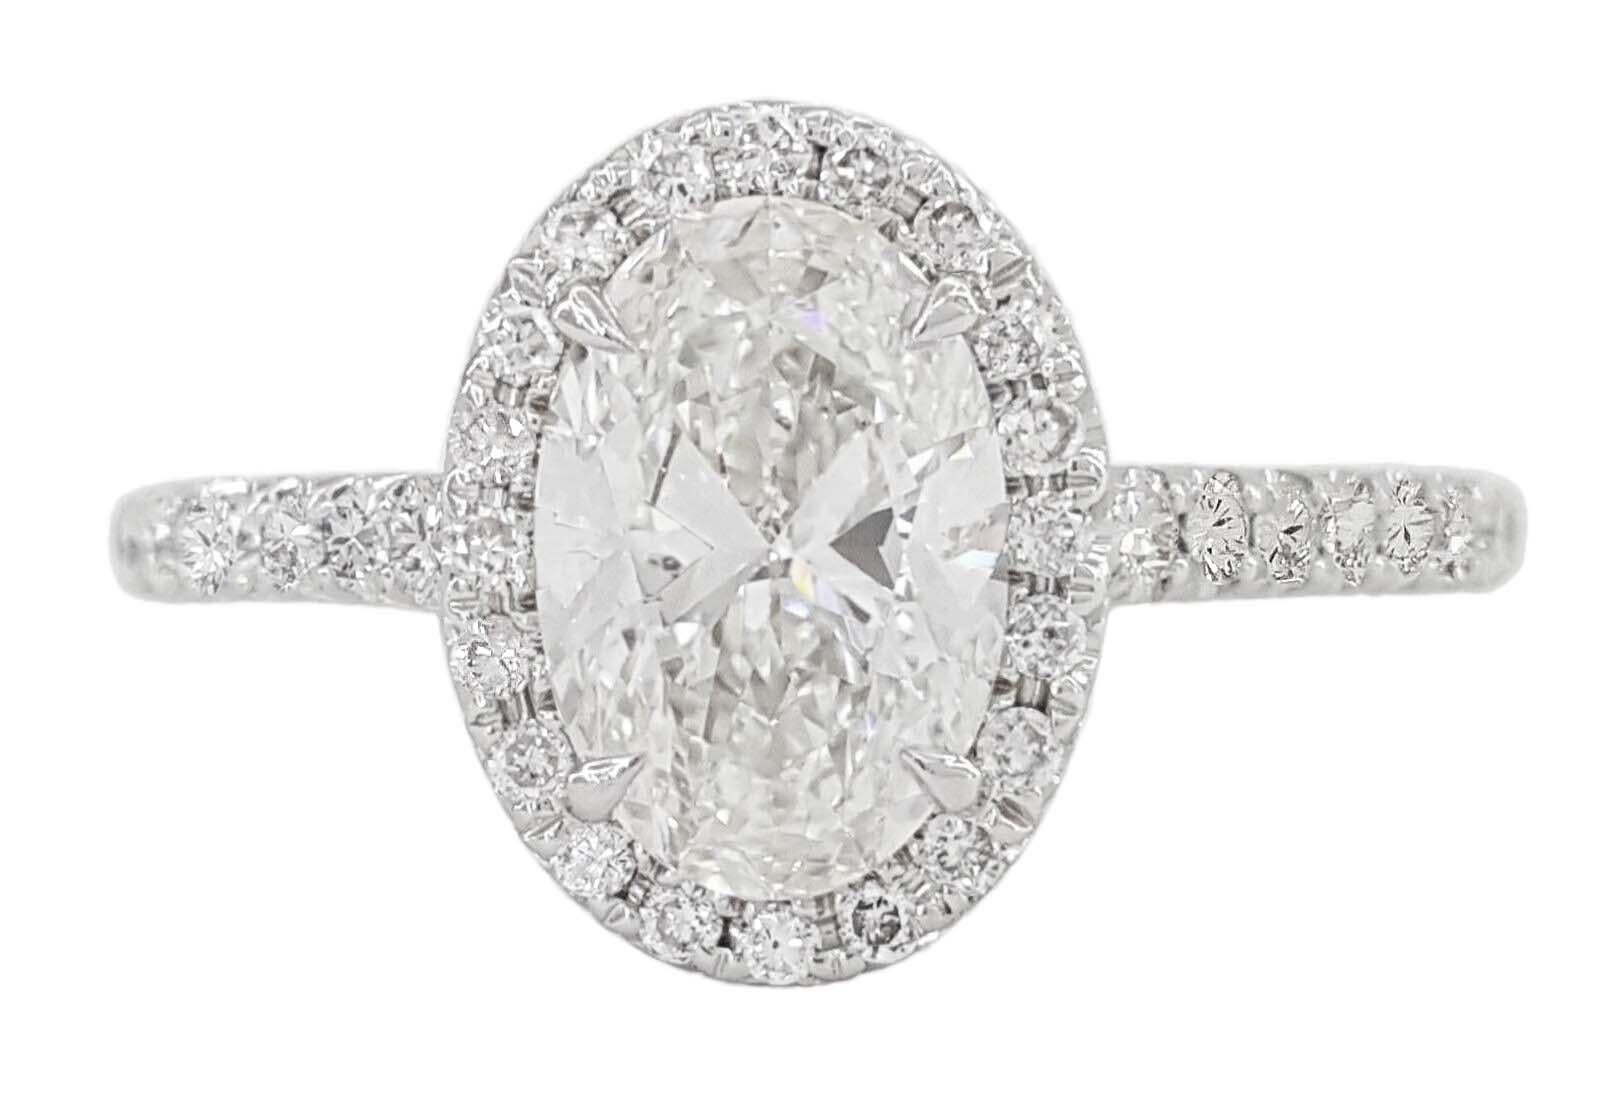 This captivating ring showcases a striking GIA-certified 2-carat oval diamond Type IIA!

It embraced by a halo of shimmering accents, all set within an elegant white gold band. The diamond, meticulously graded by the esteemed Gemological Institute